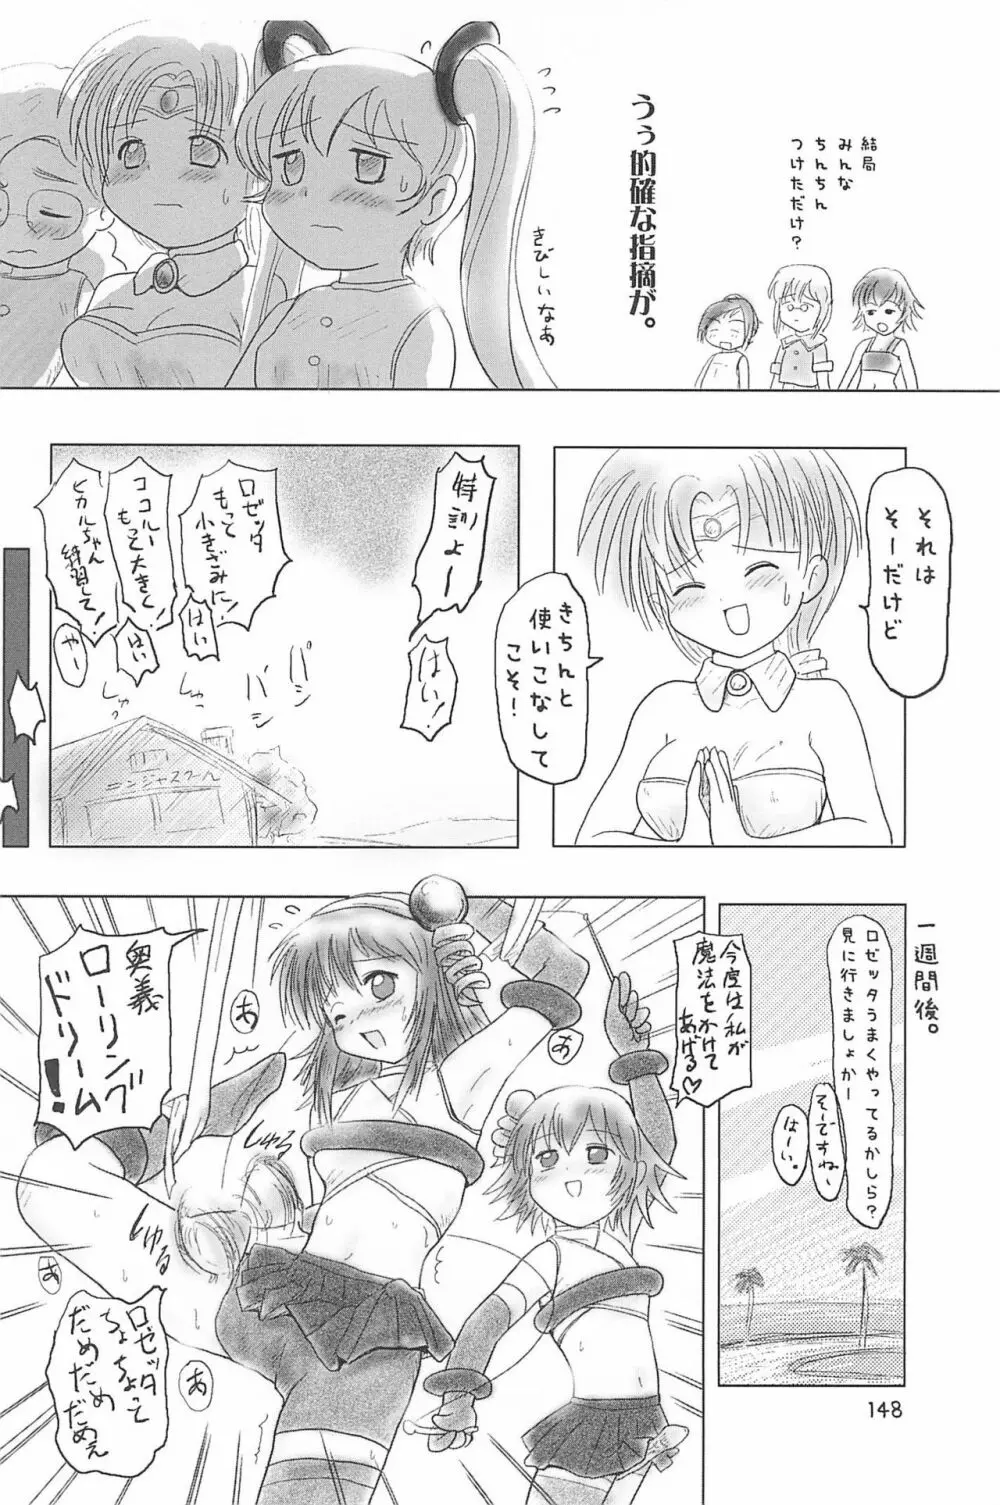 ND-special Volume 4 148ページ